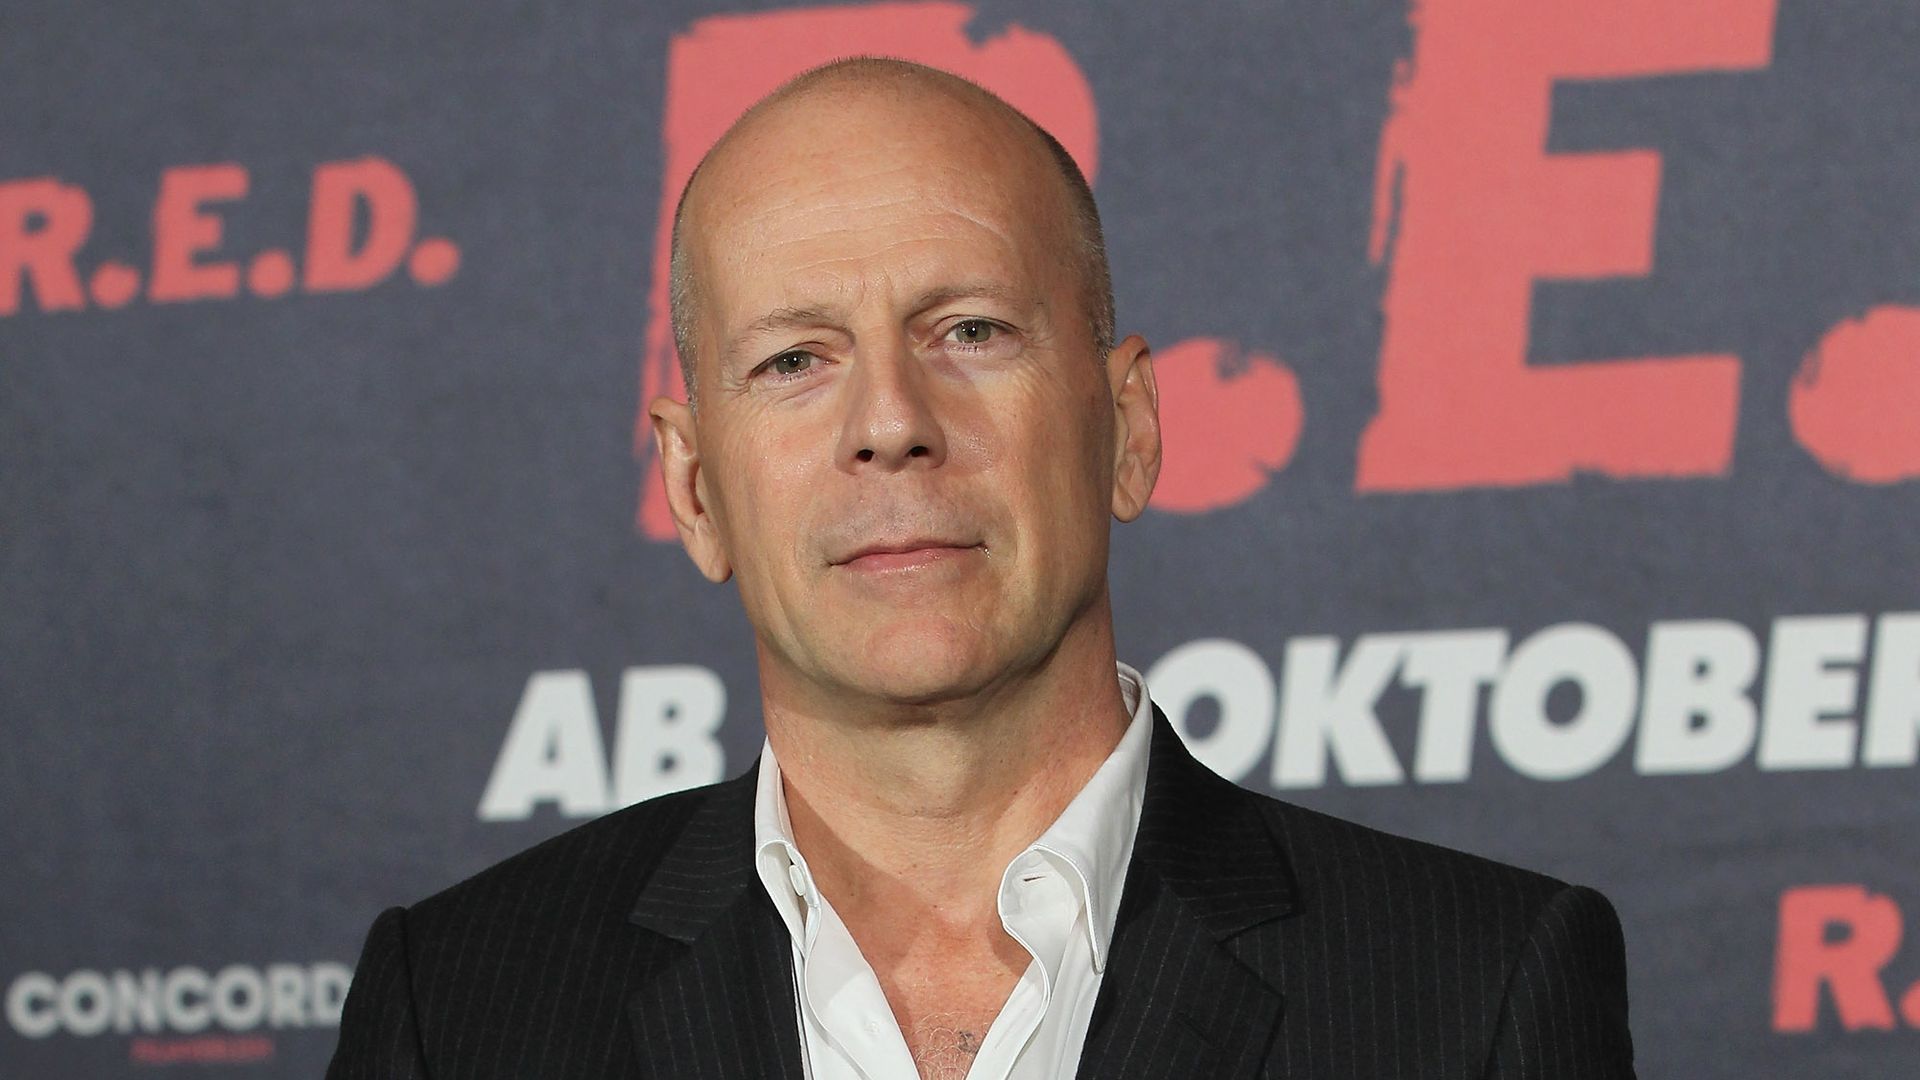 What is wrong with Bruce Willis? His debilitating ongoing health battle